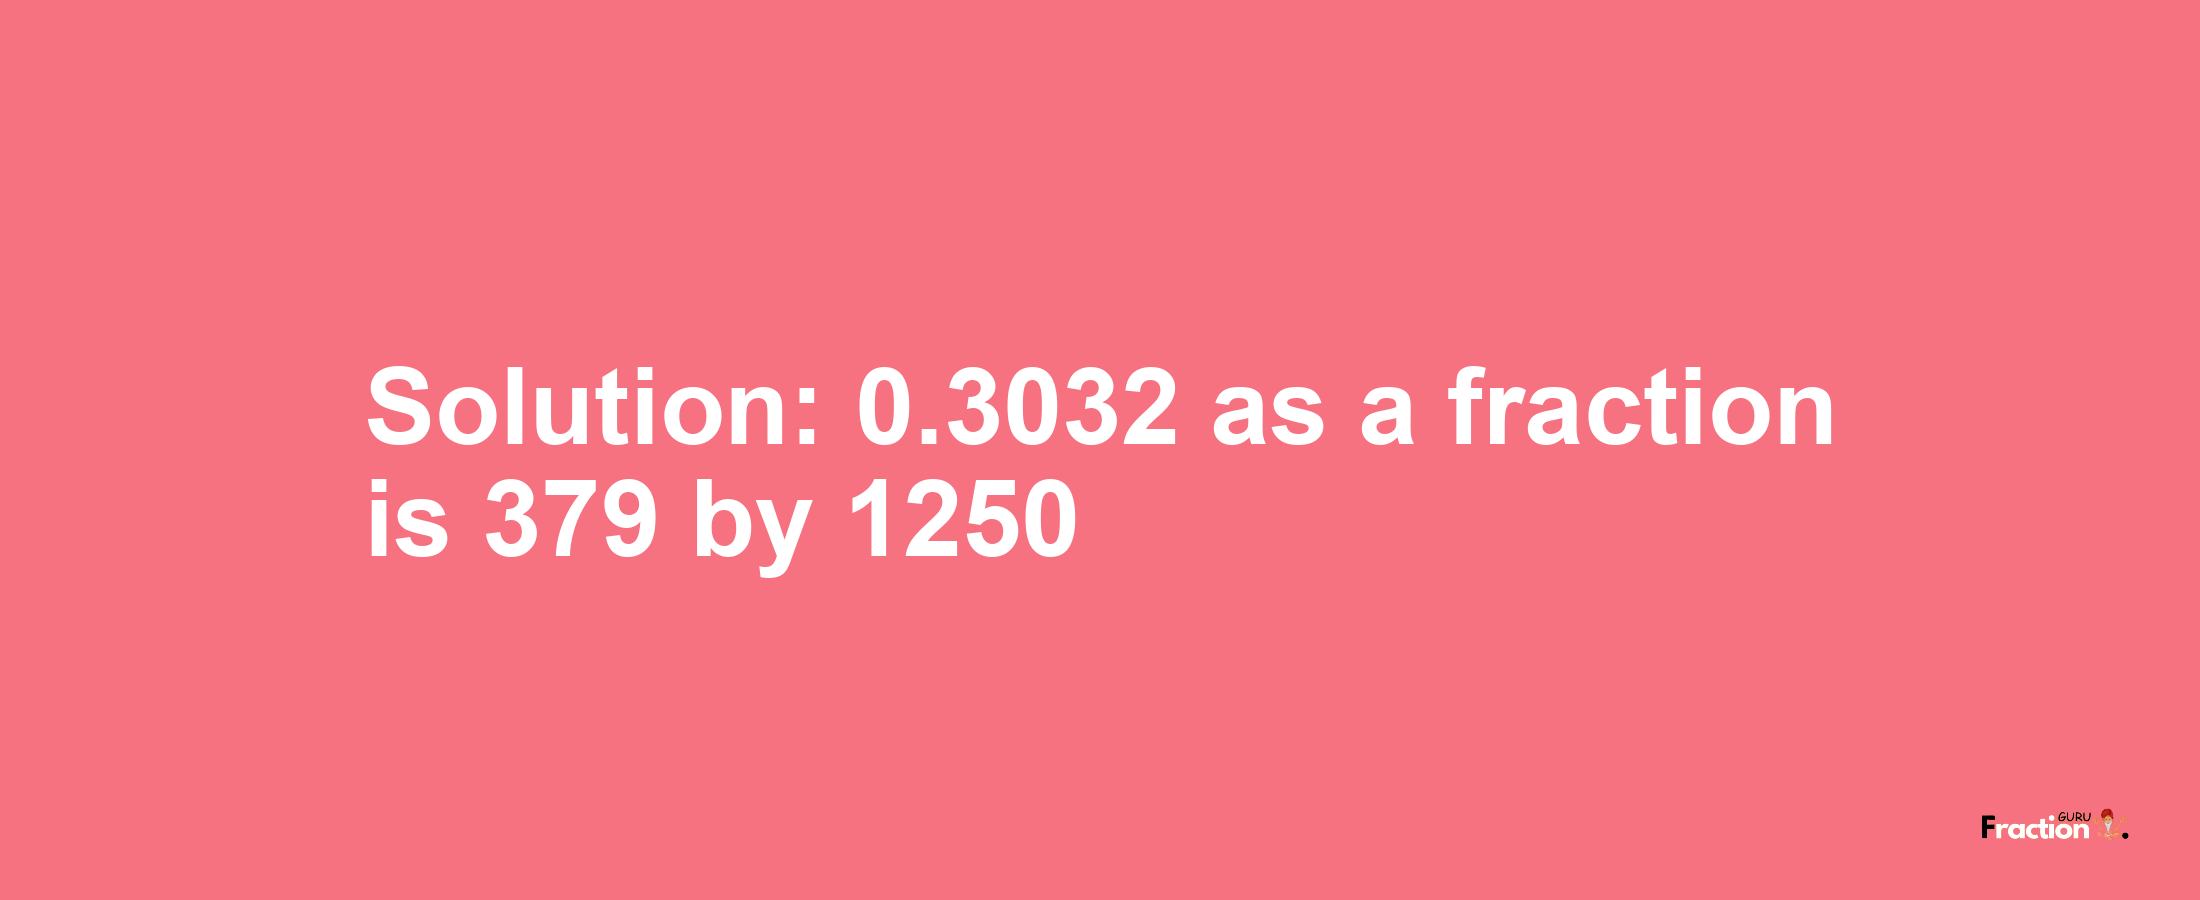 Solution:0.3032 as a fraction is 379/1250